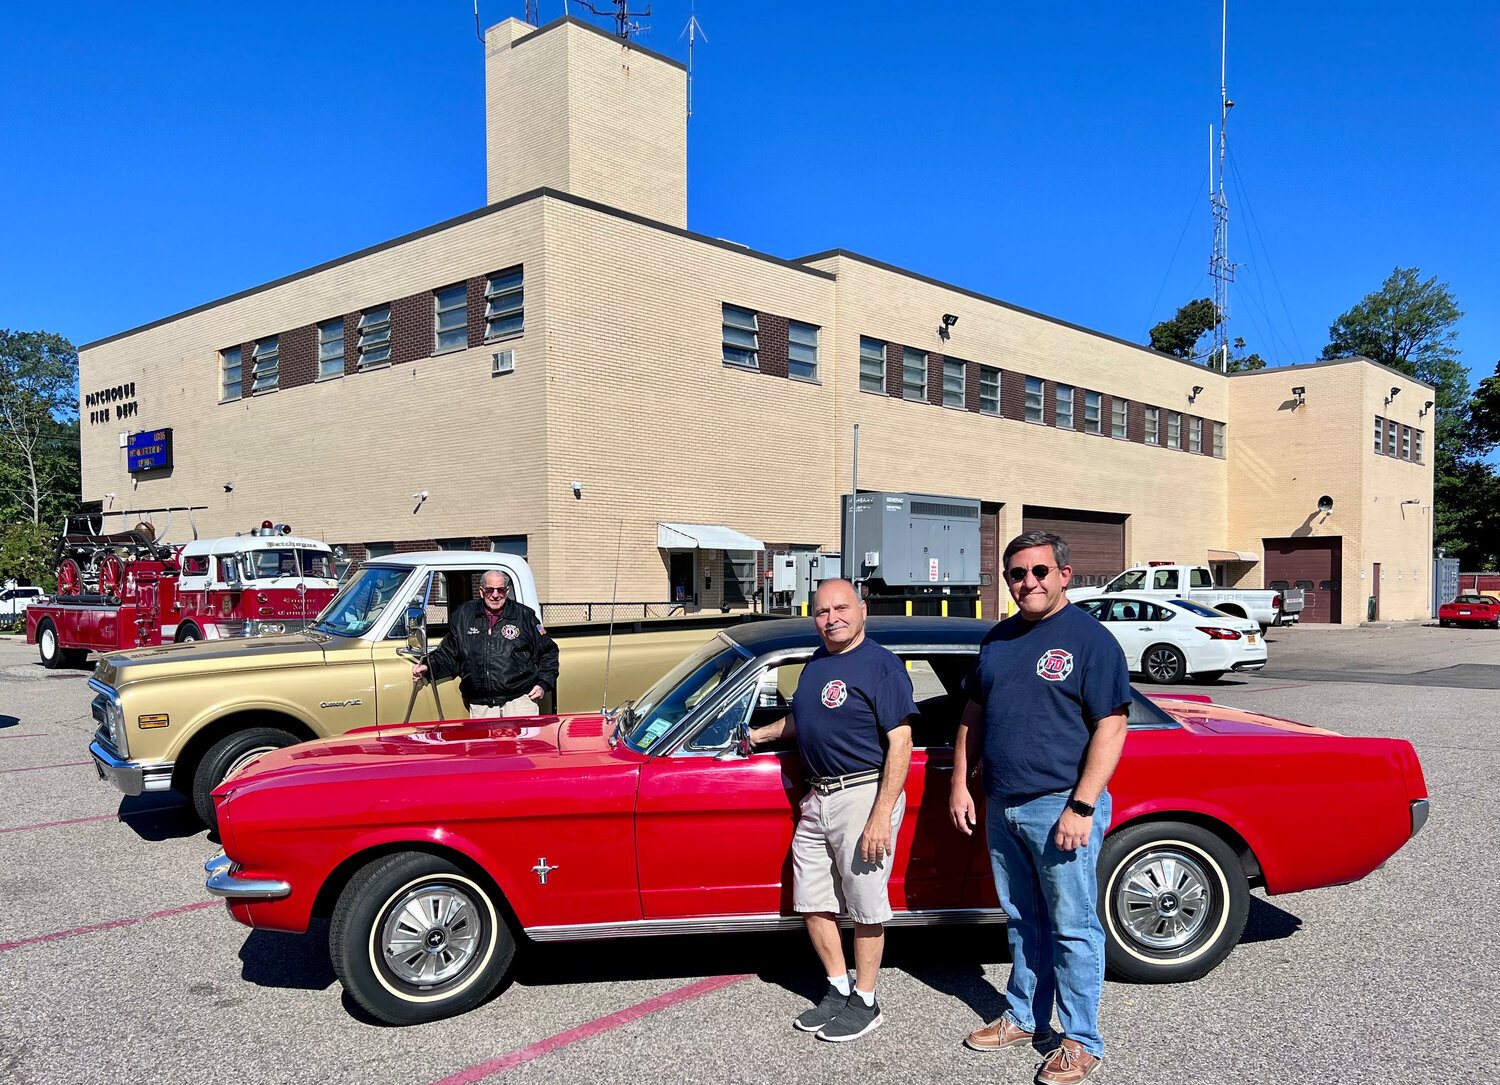 Patchogue firefighters Ronnie Donato (left) and Dan Brooks in front of the Donato brothers’ 1966 Ford Mustang. In back is former Patchogue fire chief Paul Felice with his 1960 Mac Truck.